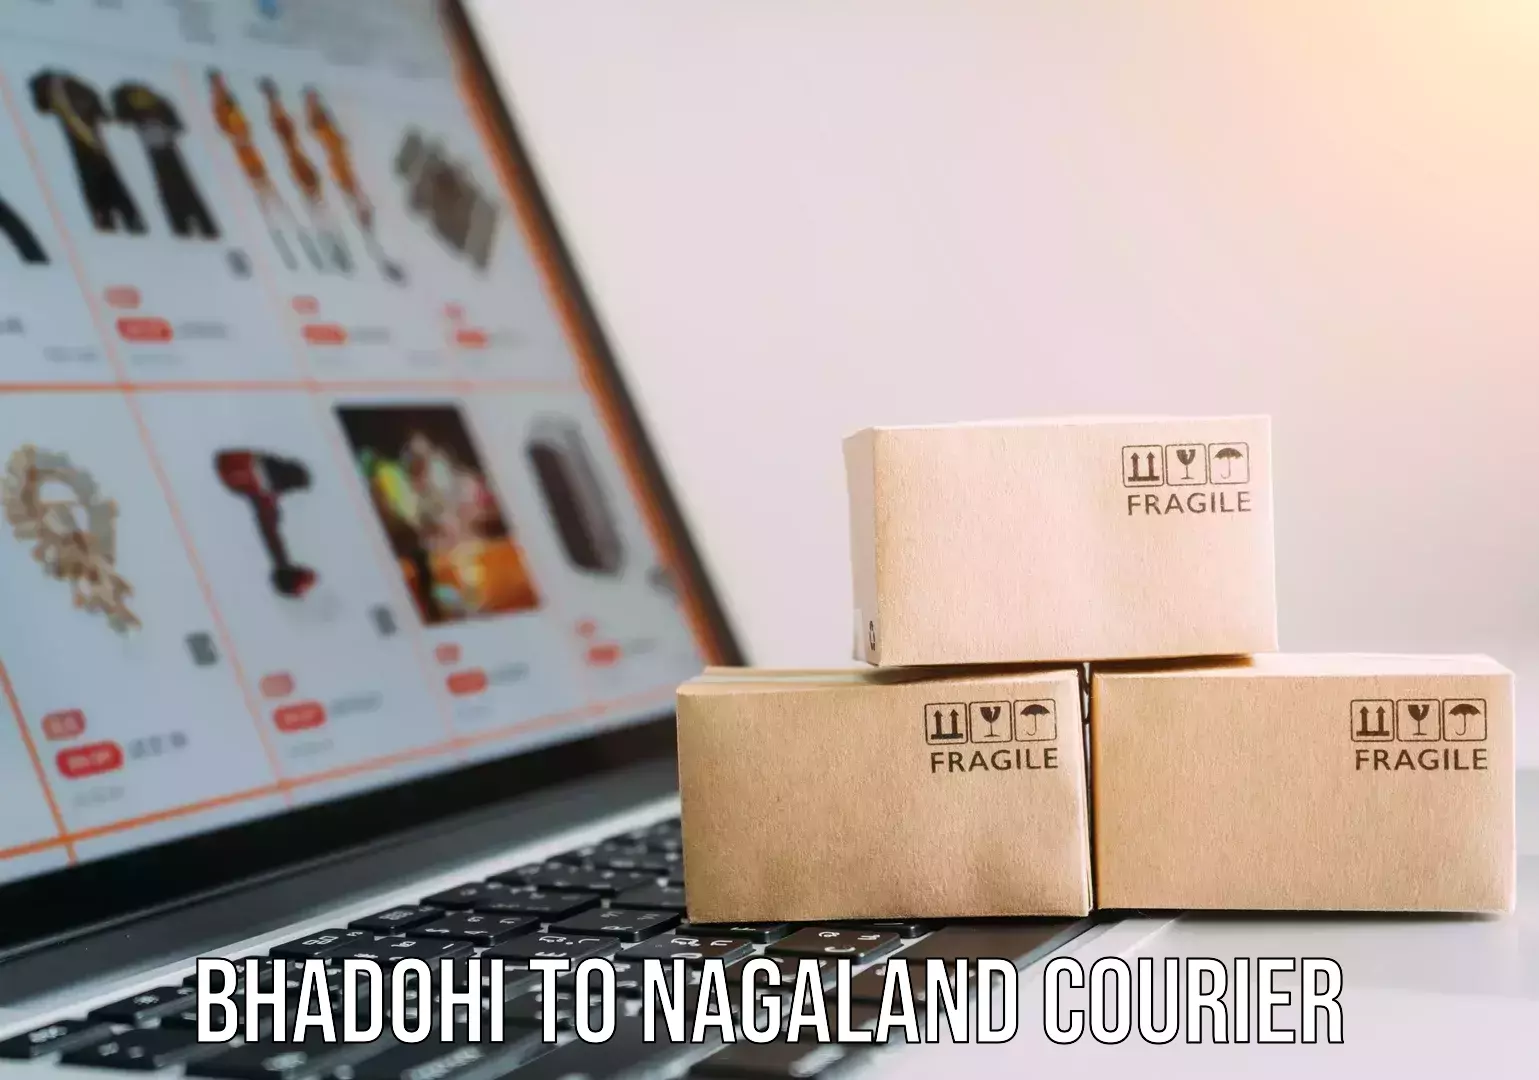 On-call courier service Bhadohi to Nagaland